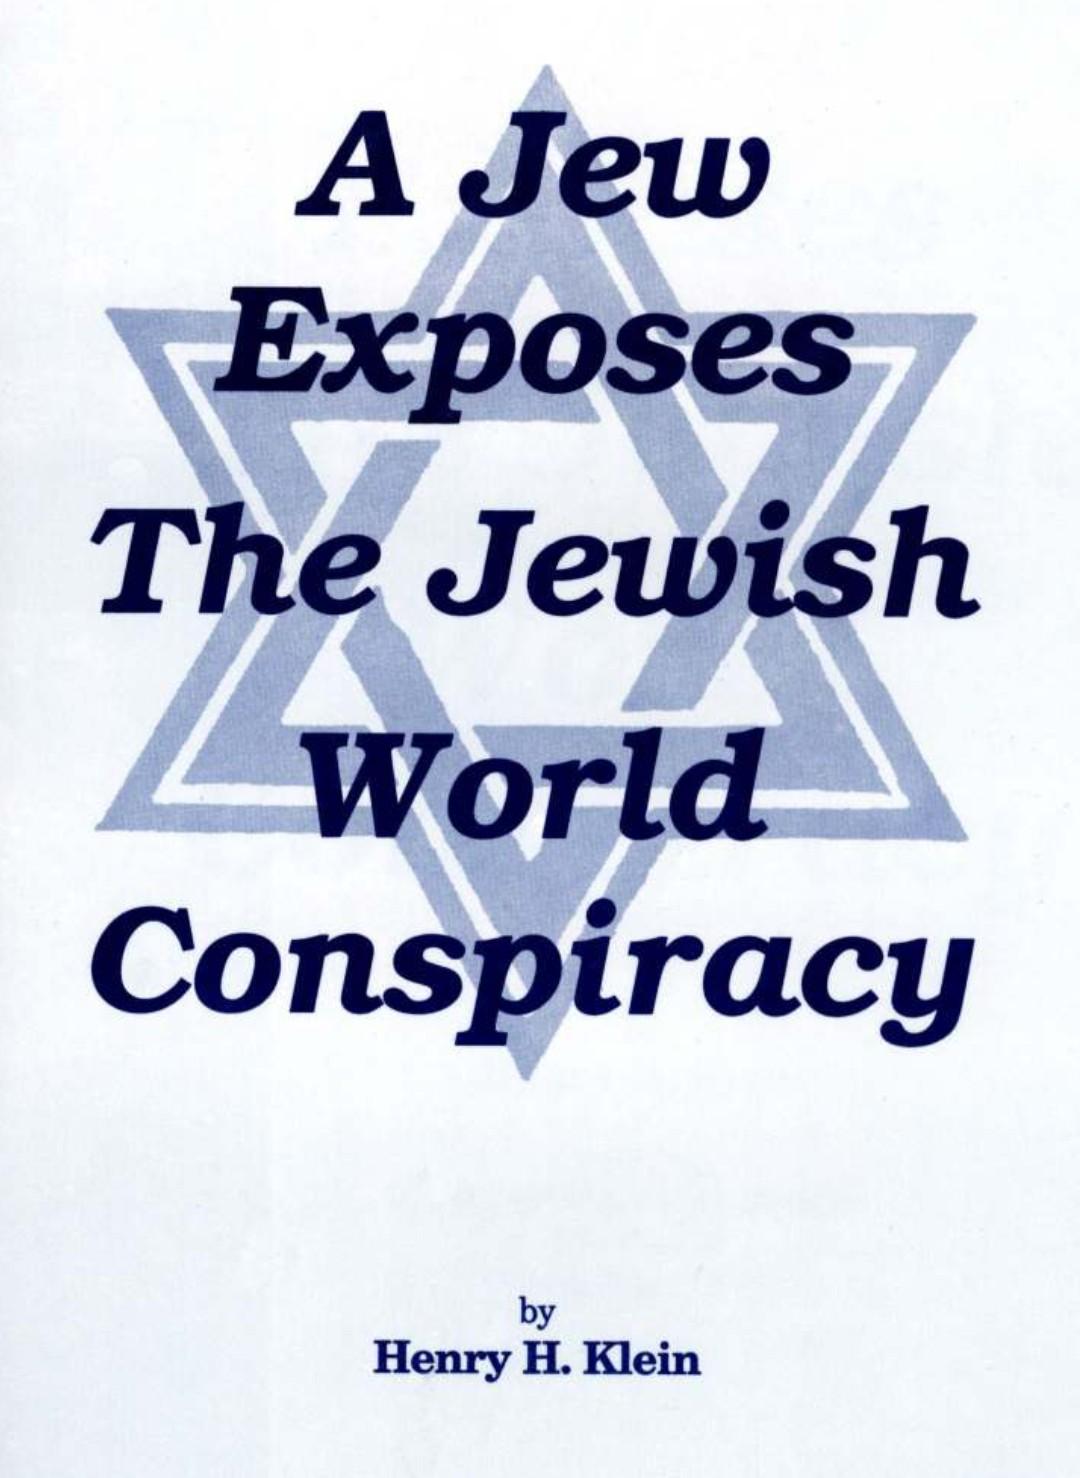 A Jew Exposes the Jewish World Conspiracy (1946) by Henry H. Klein